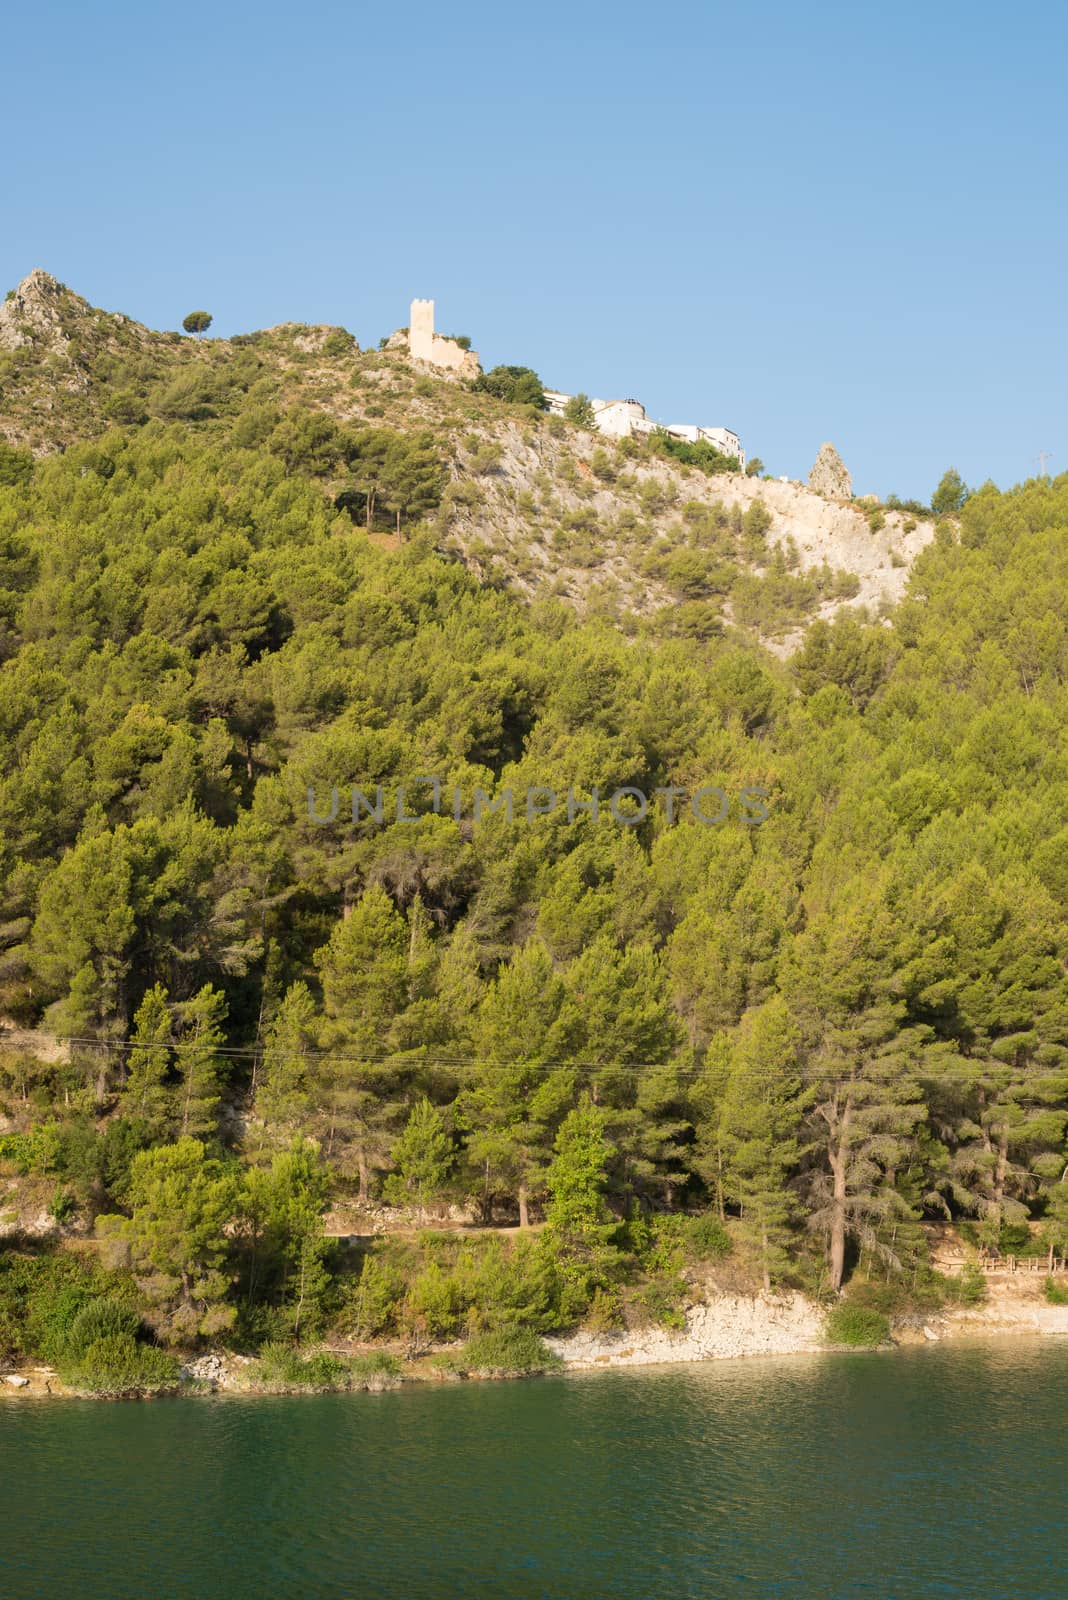 Hilltop castle of Guadalest above the calm waters of a lake